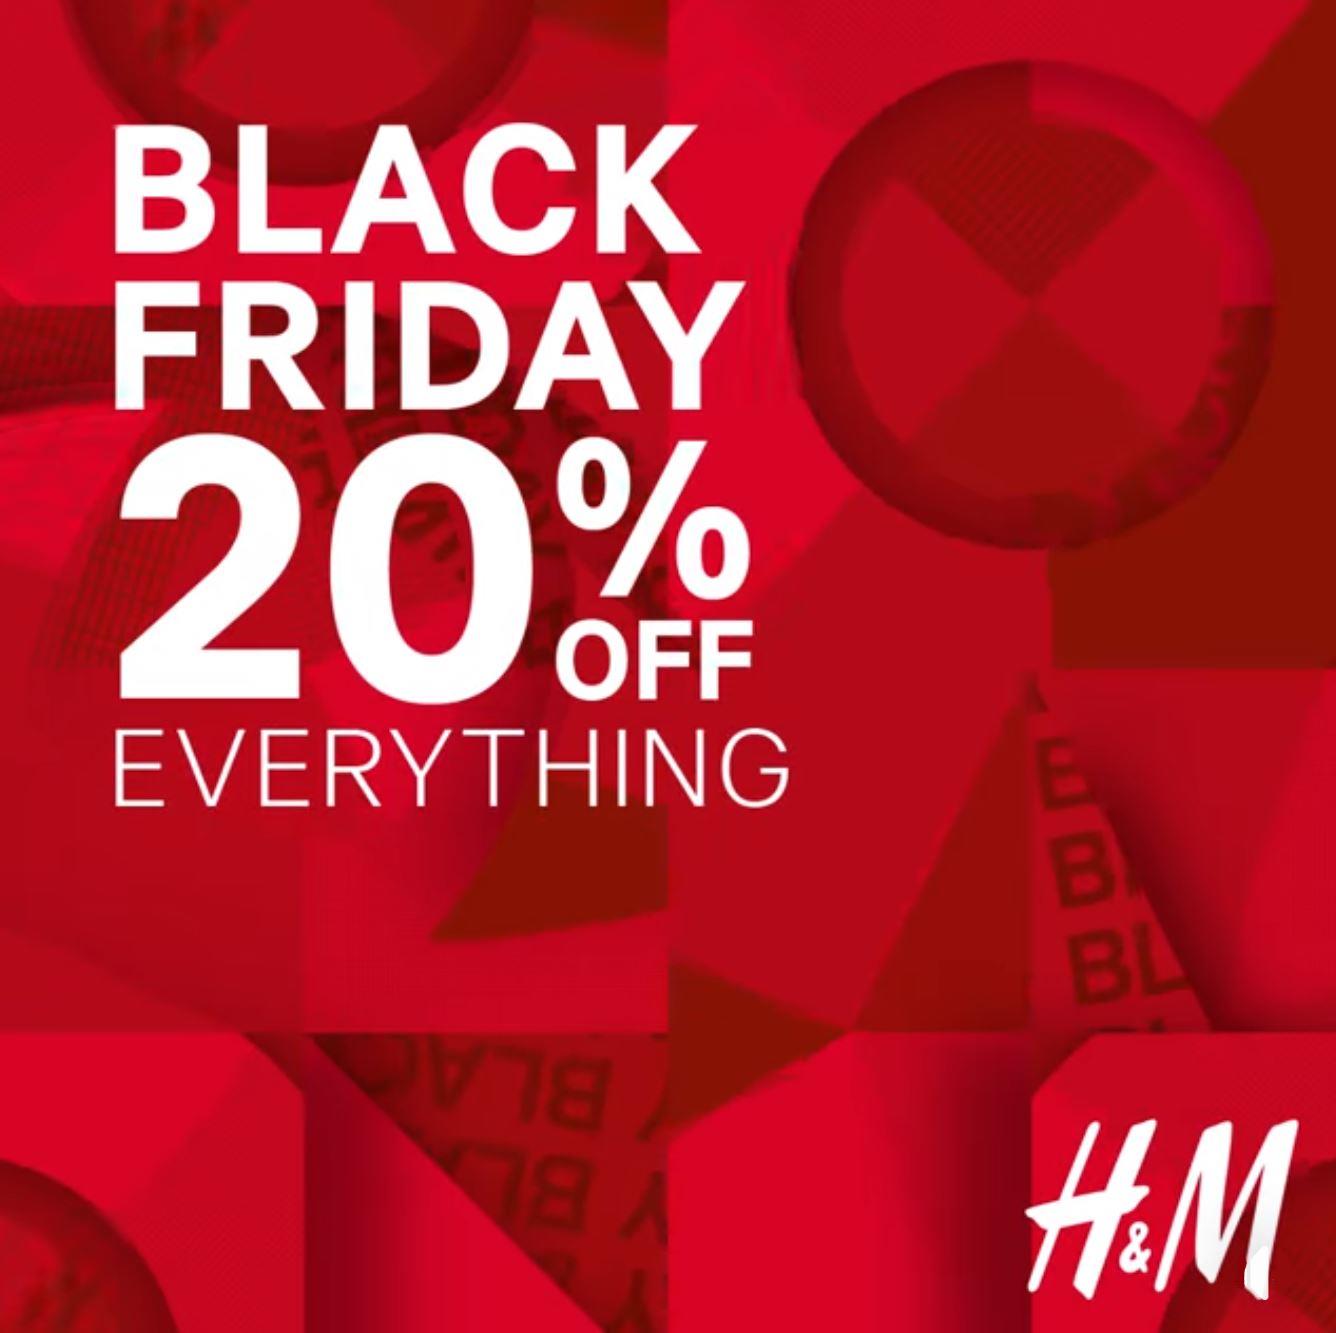 H&M Black Friday Deals - Get 20% off on everything! in Pune